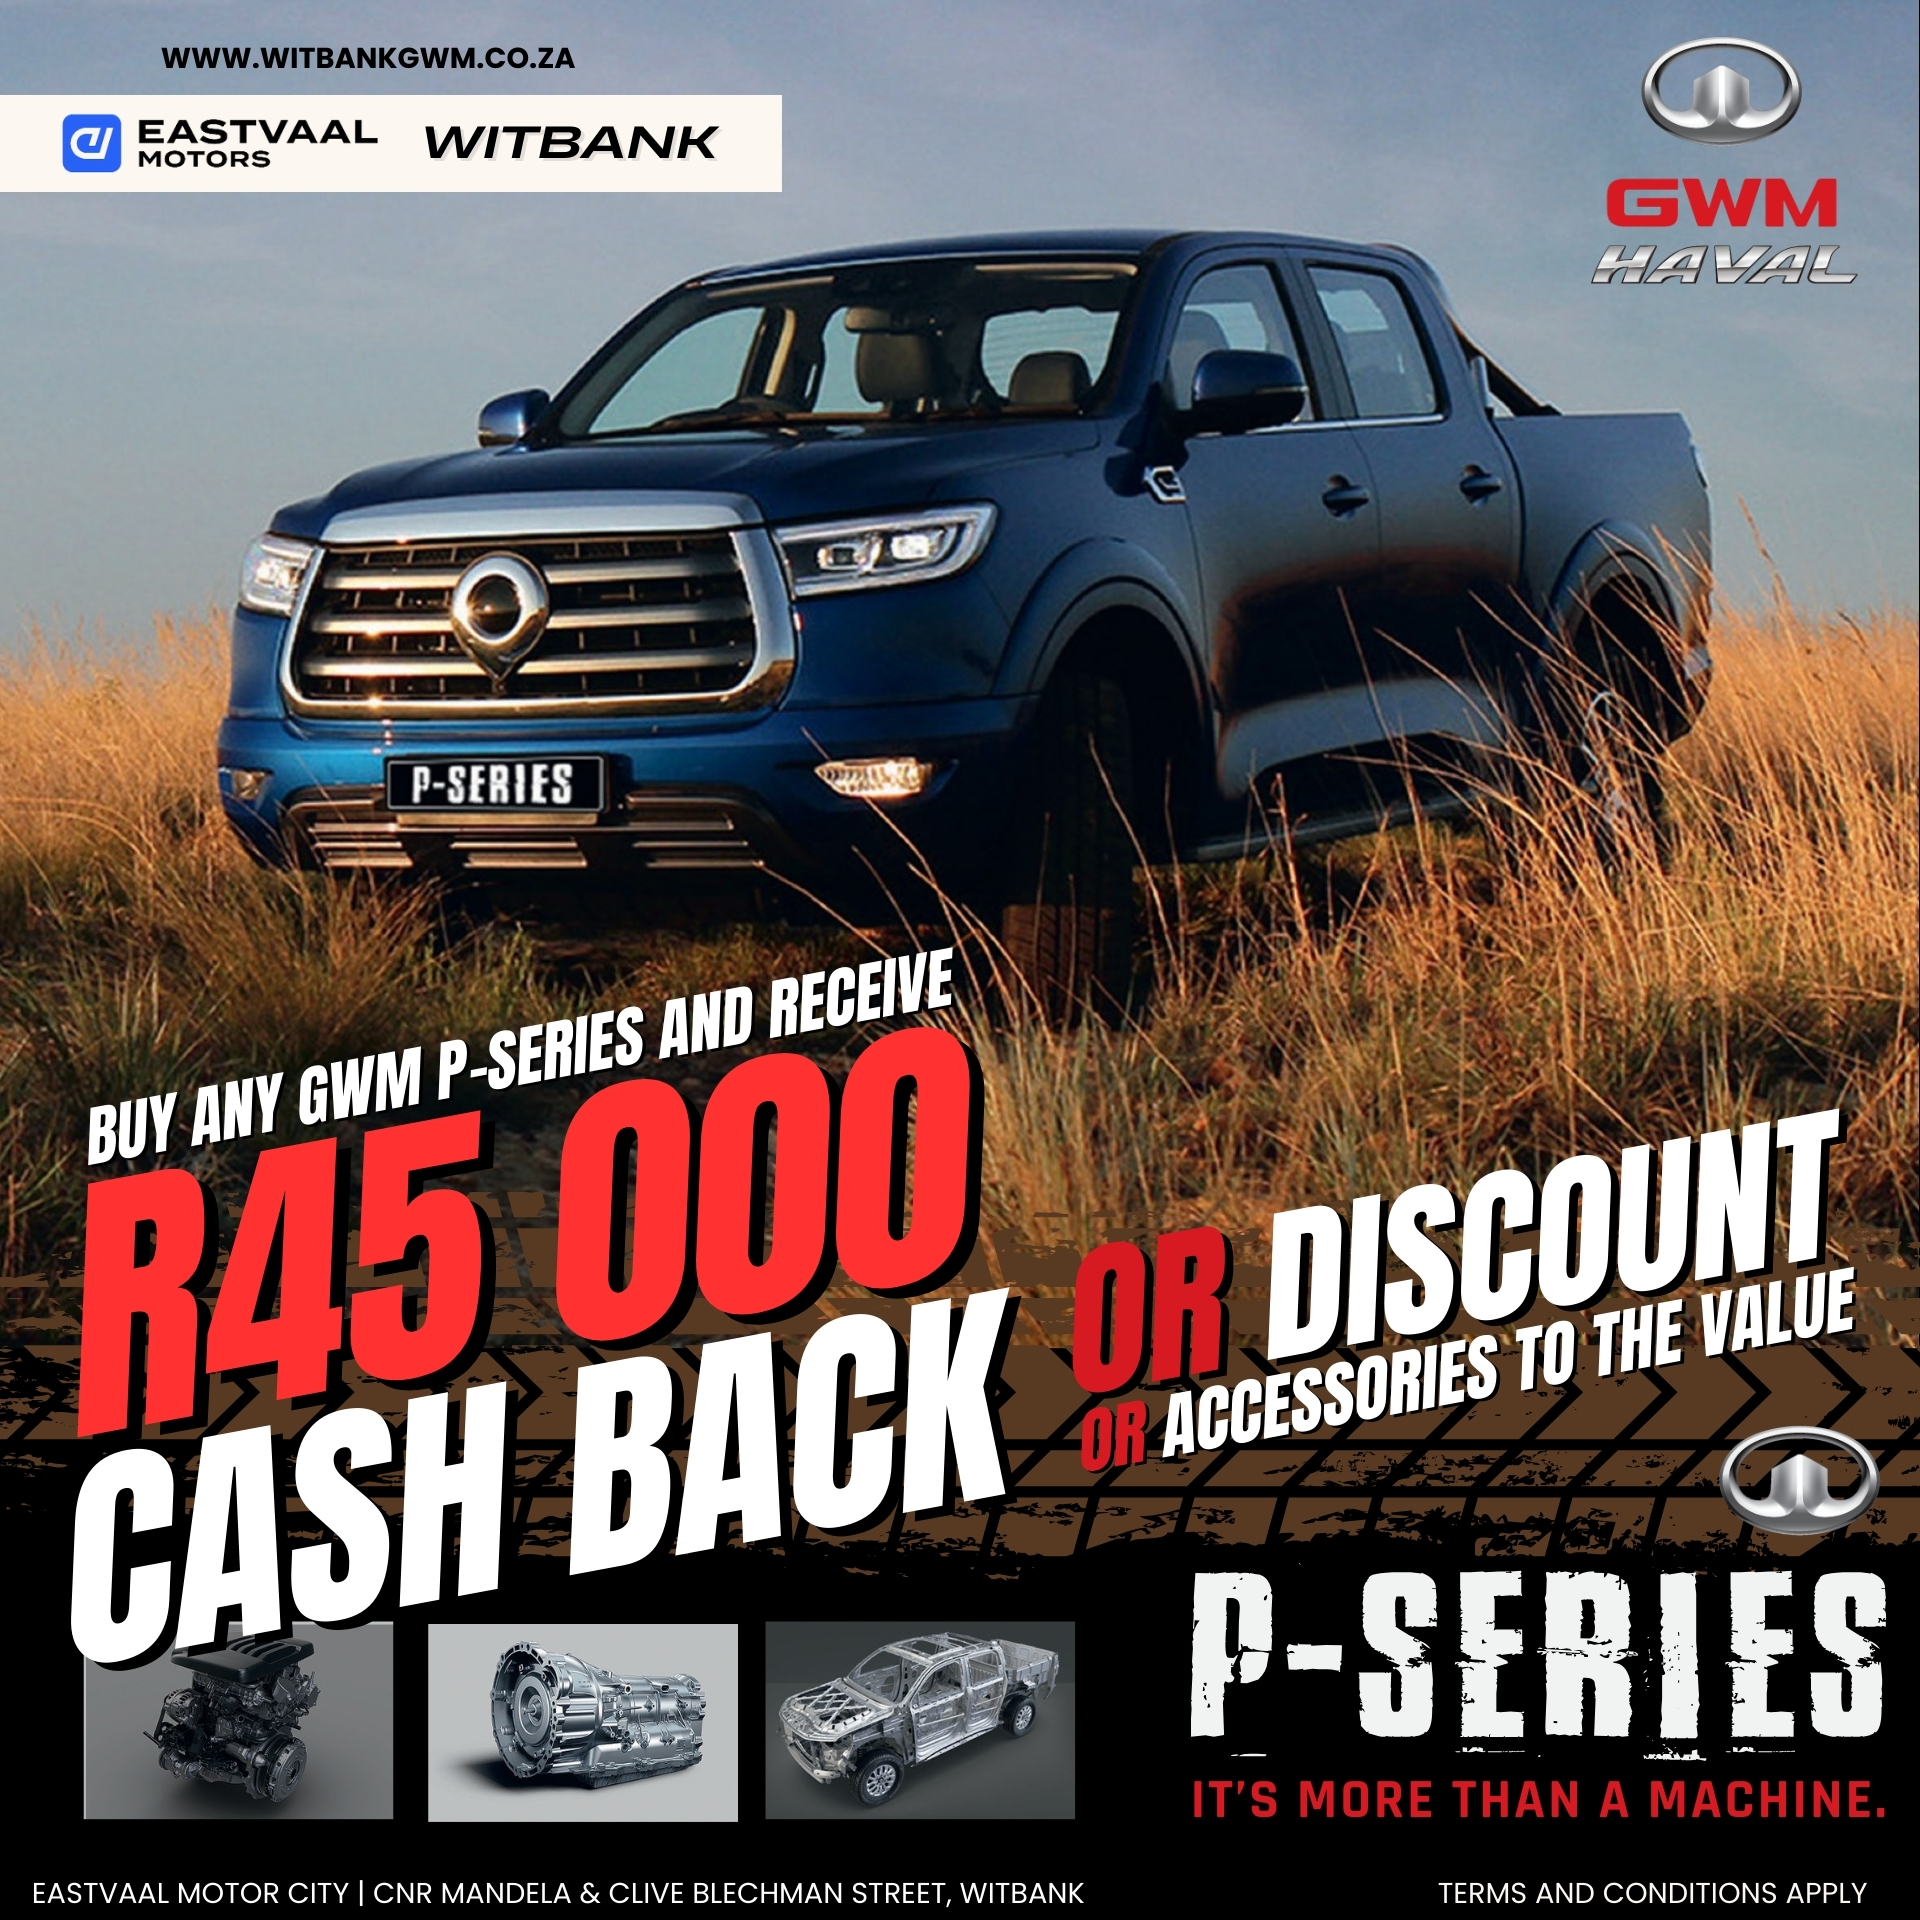 Buy Any GWM P-Series This April image from Eastvaal Motors